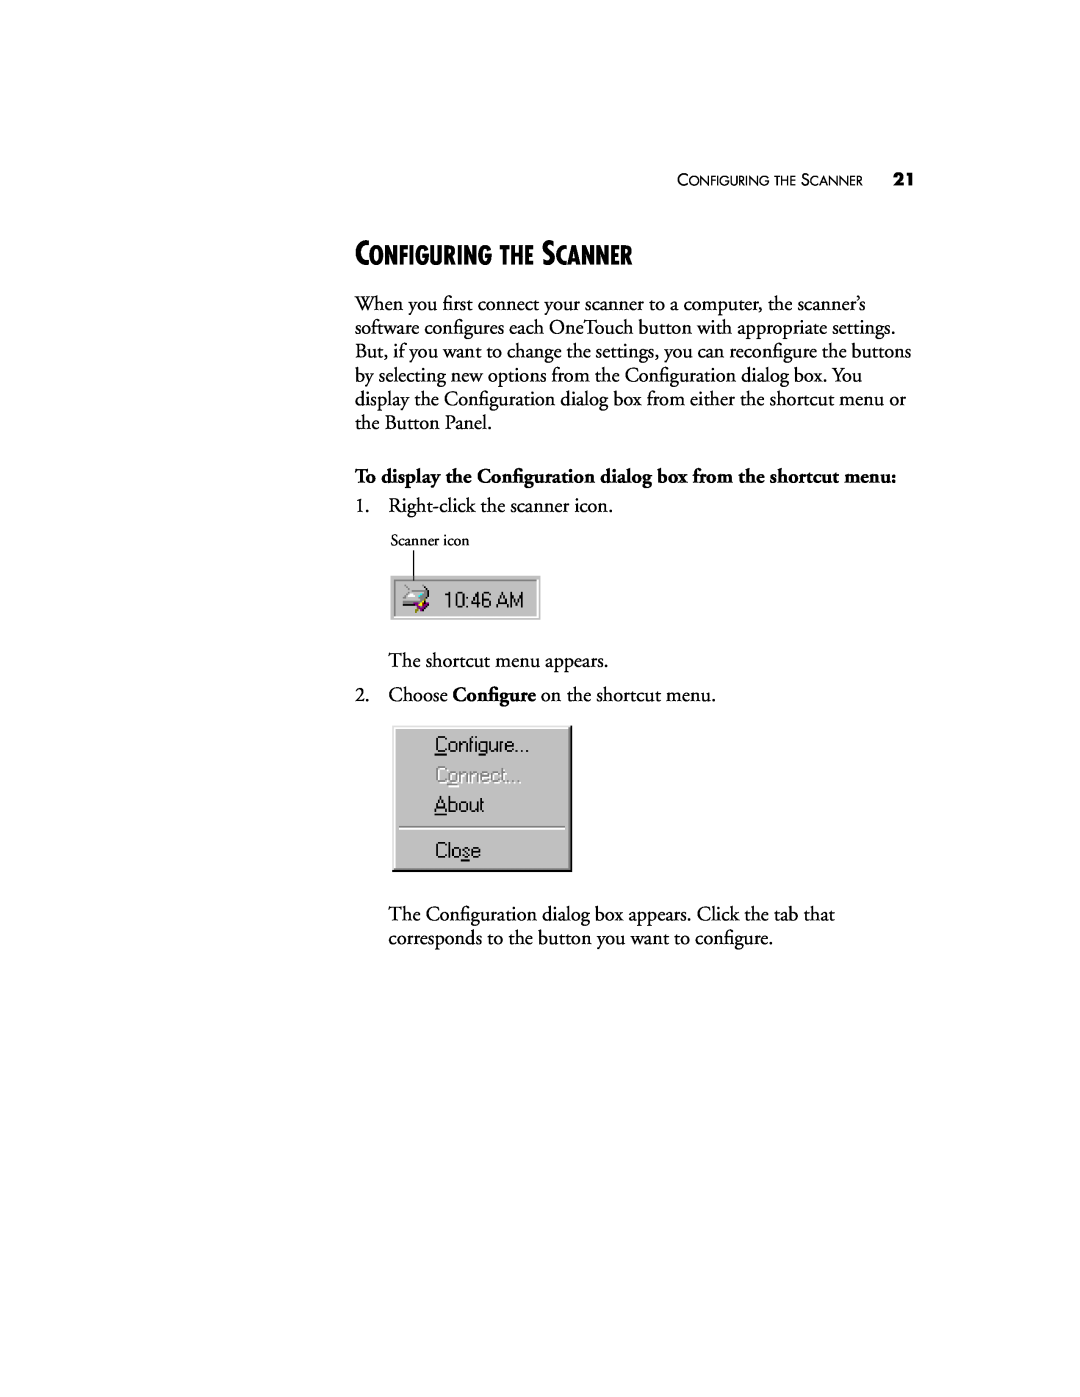 Visioneer 5820 manual Configuring The Scanner, To display the Conﬁguration dialog box from the shortcut menu 